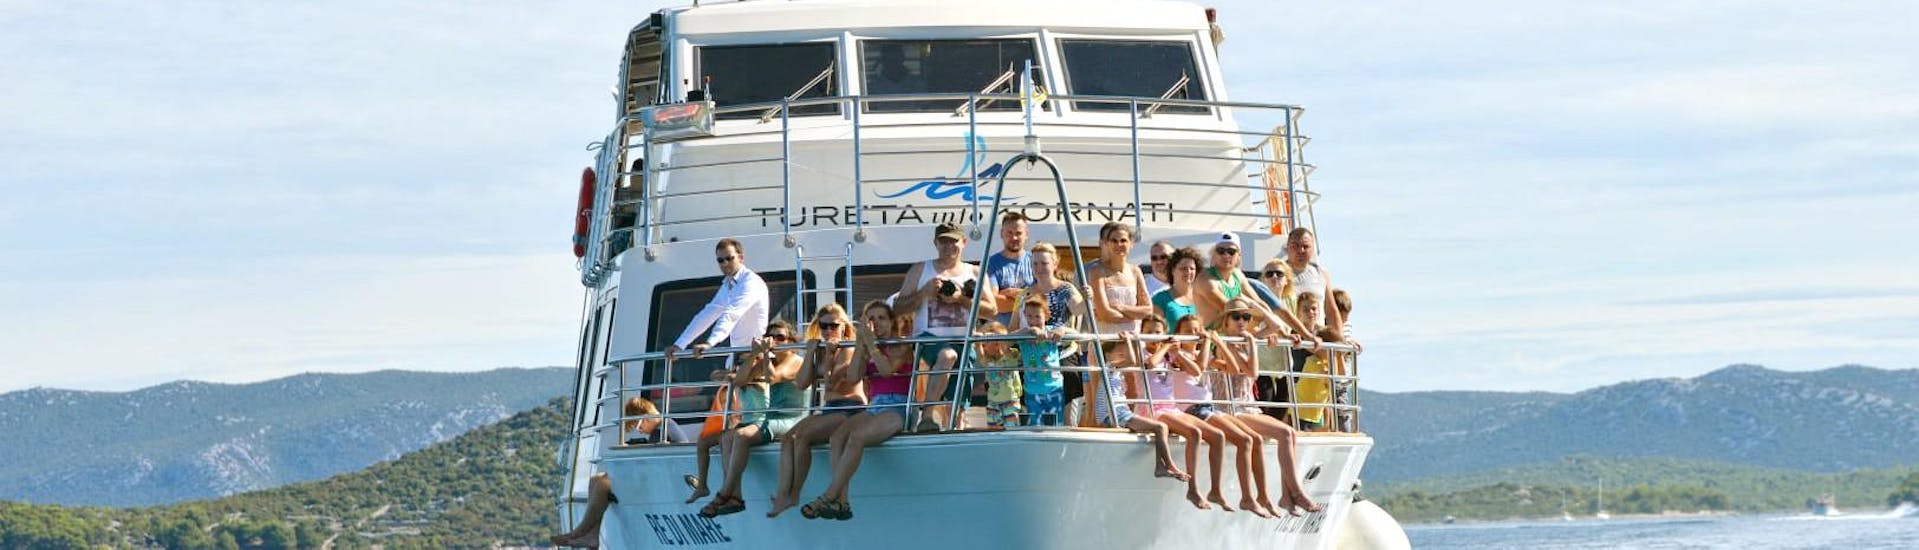 People sitting on the boat during the boat trip to the Kornati national park with Tureta Tours Murter.